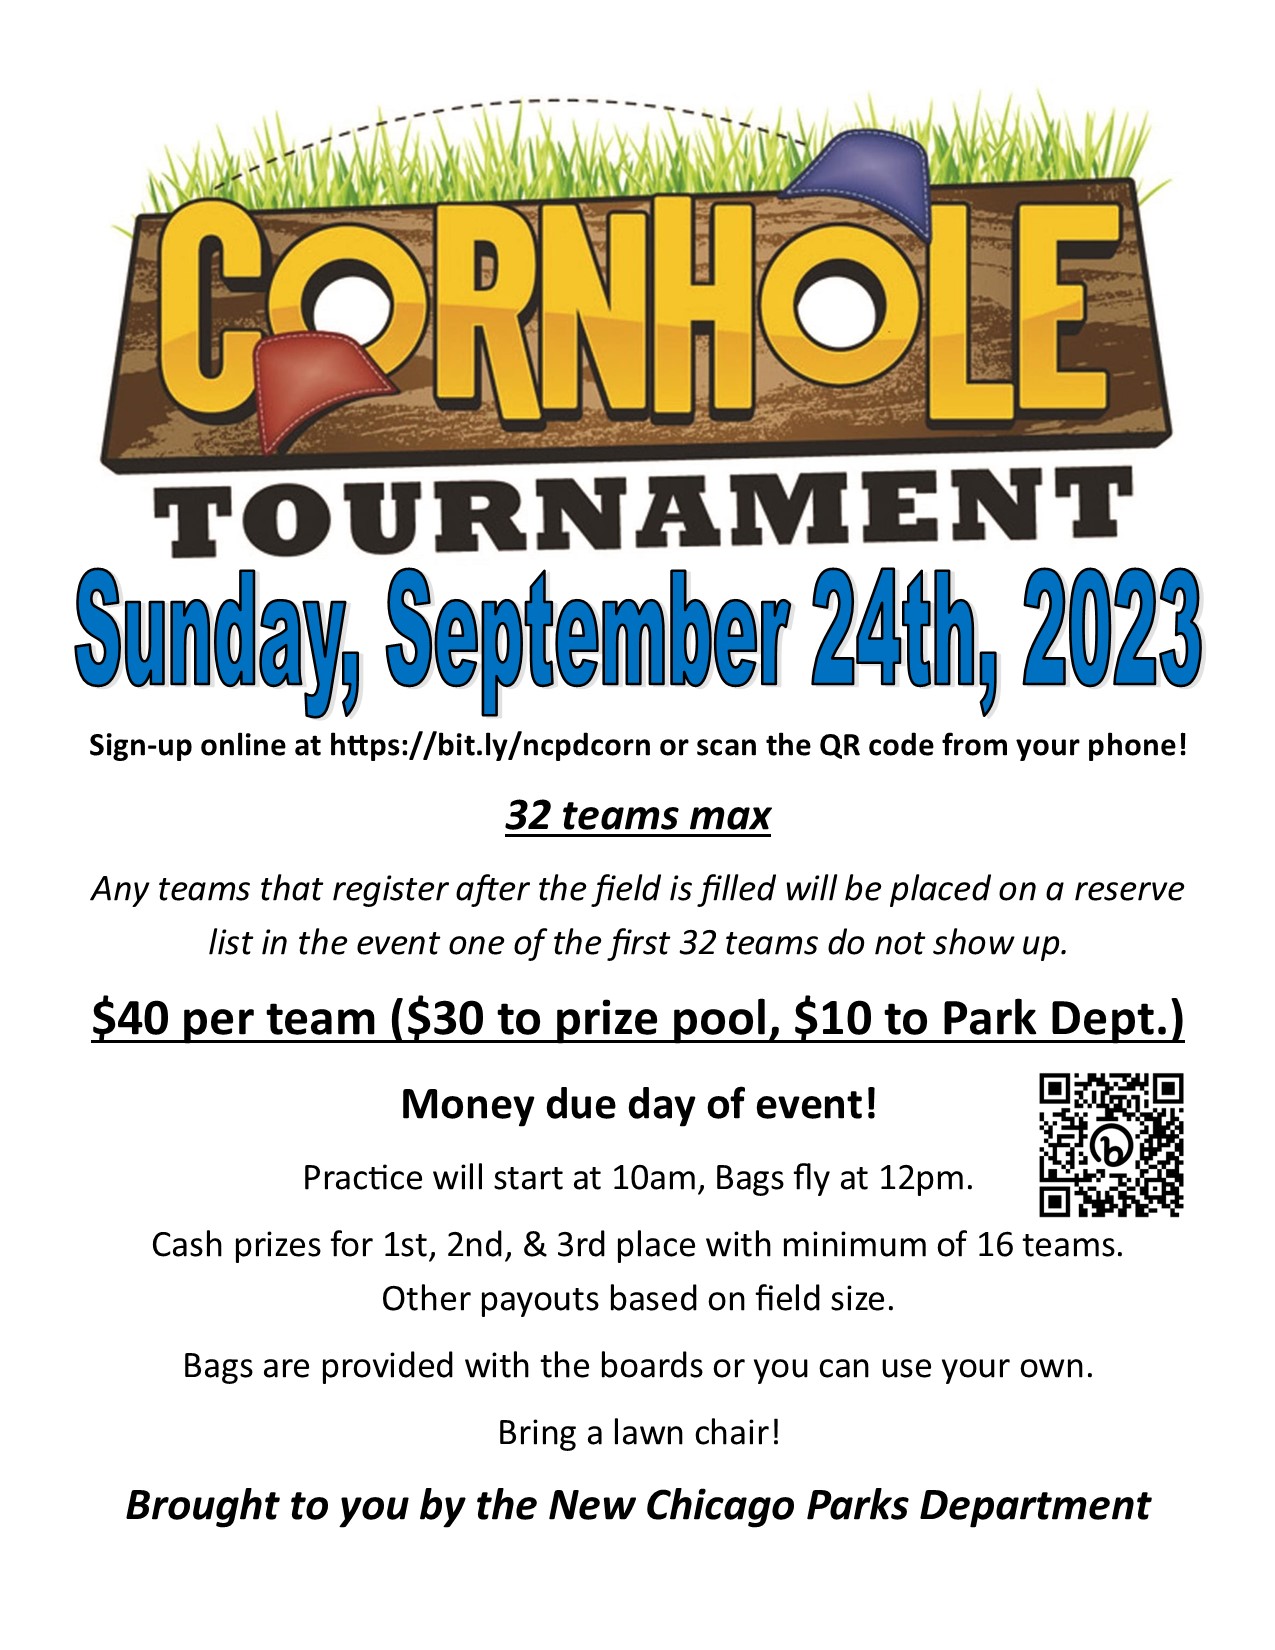 Flyer for September Cornhole Tournament $40 per team September 24, 2023 Practice Starts at 10am, Bags fly at 12pm